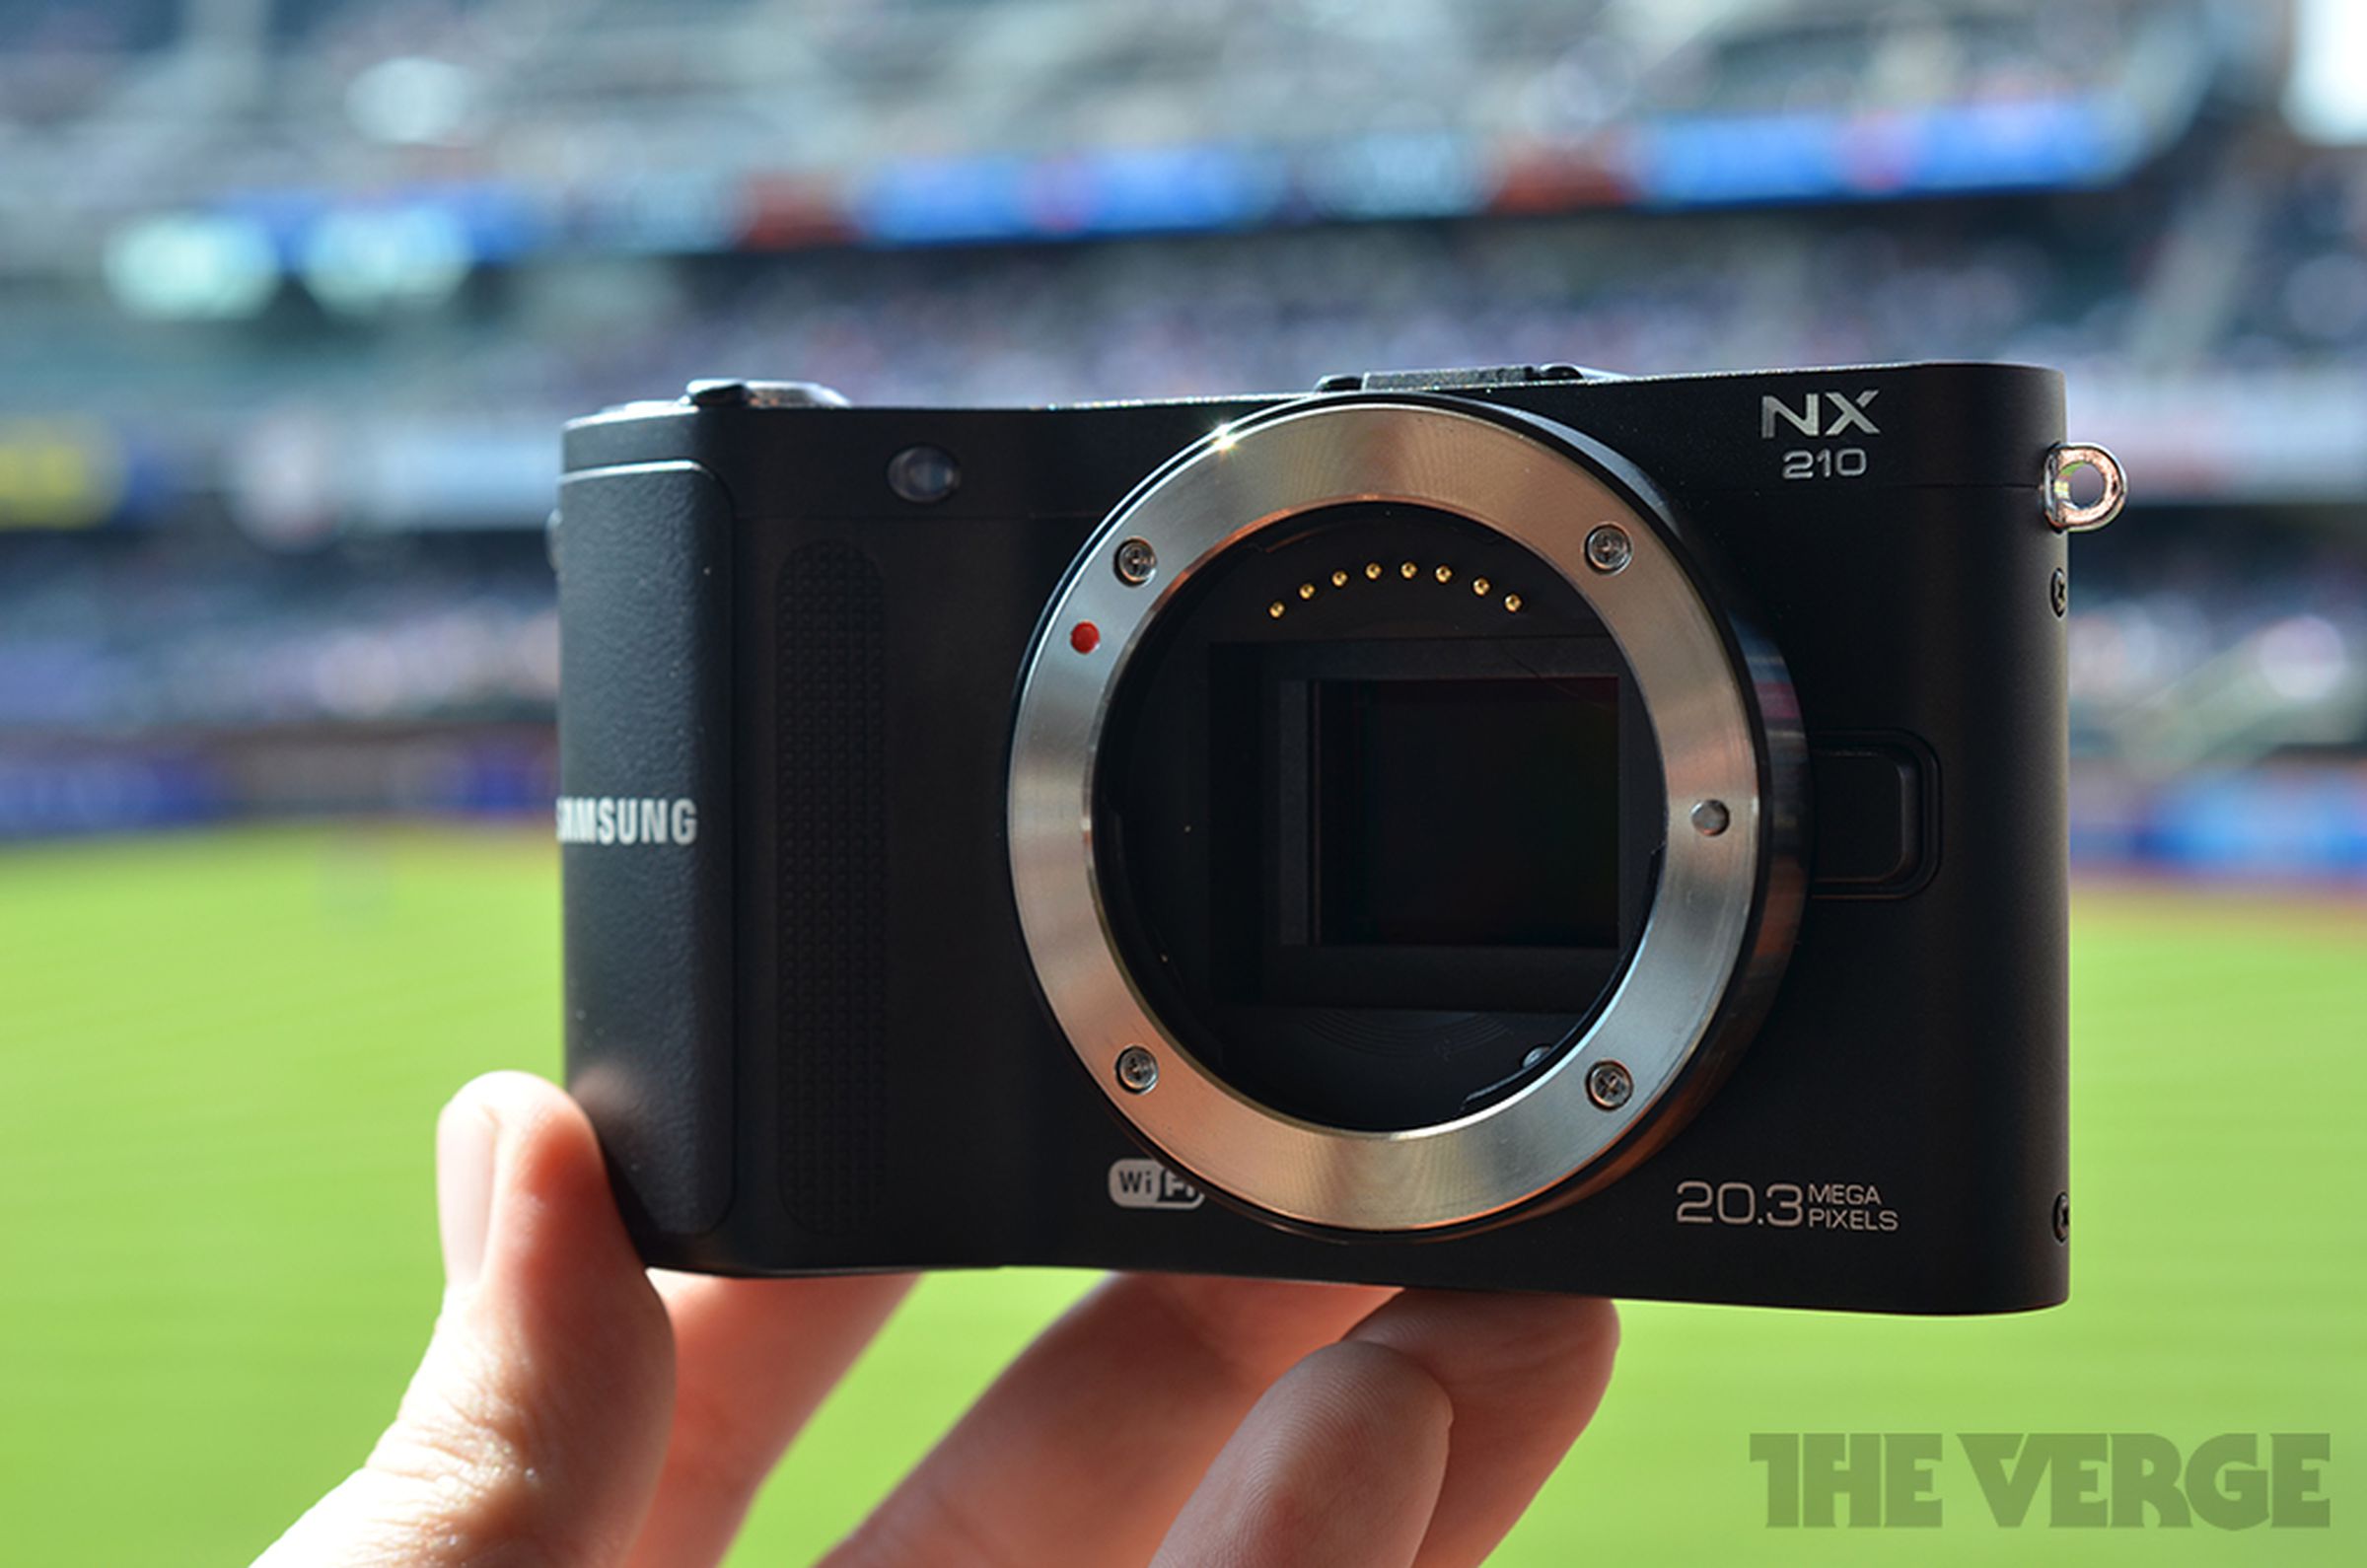 Samsung NX210 hands-on pictures